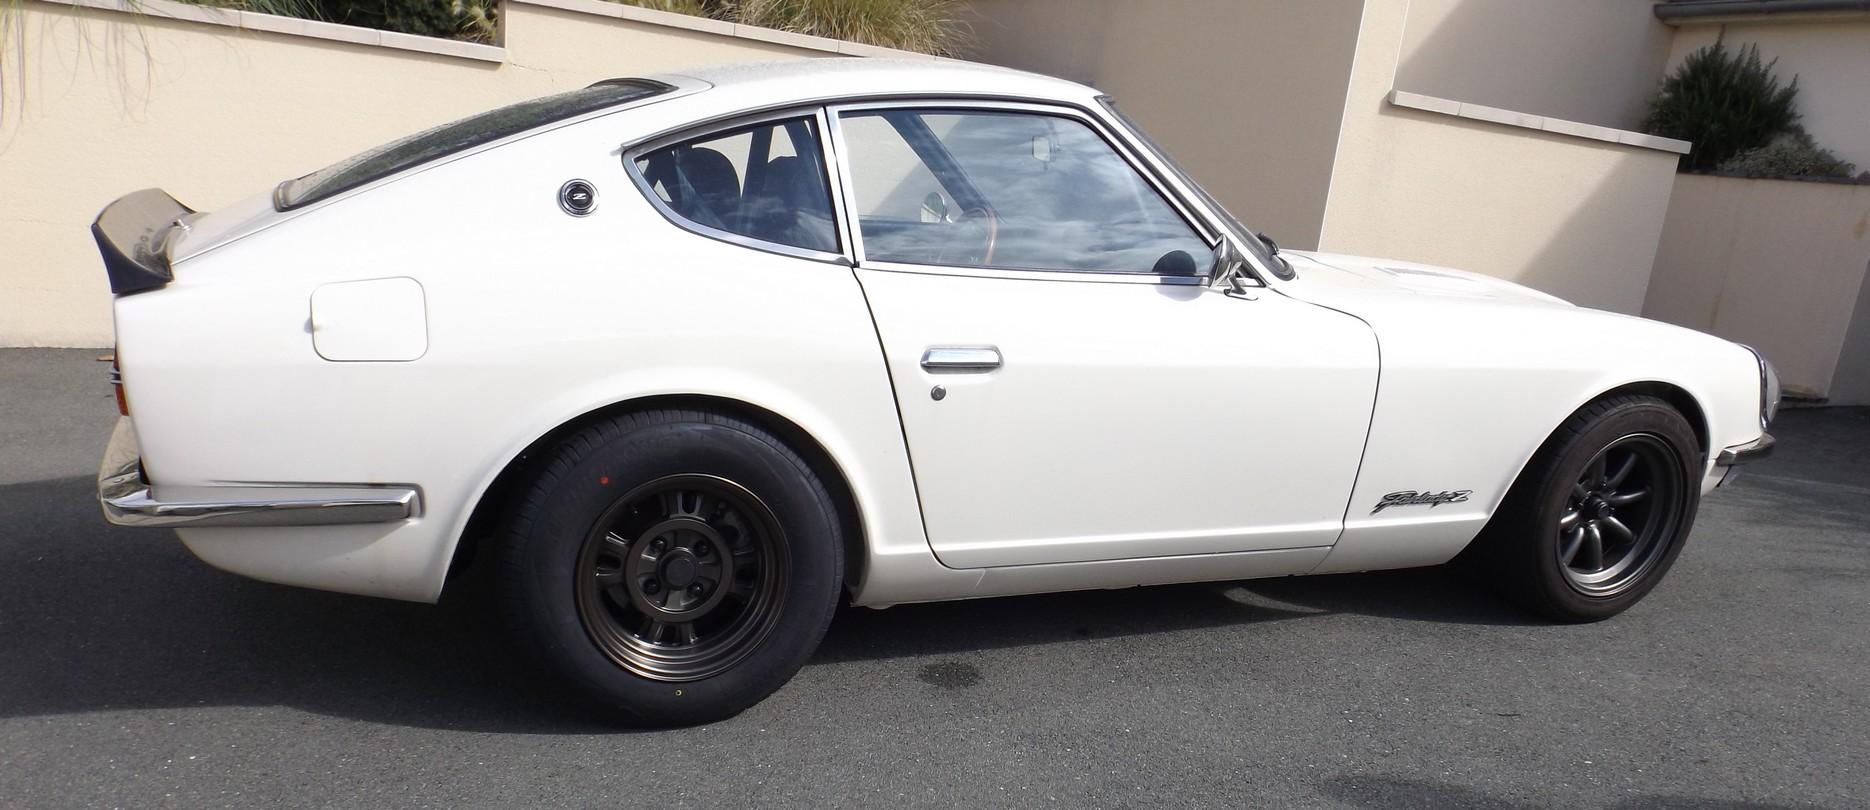 Parts for Sale: 4x reproduction Nissan Fairlady Z432-R 'works 